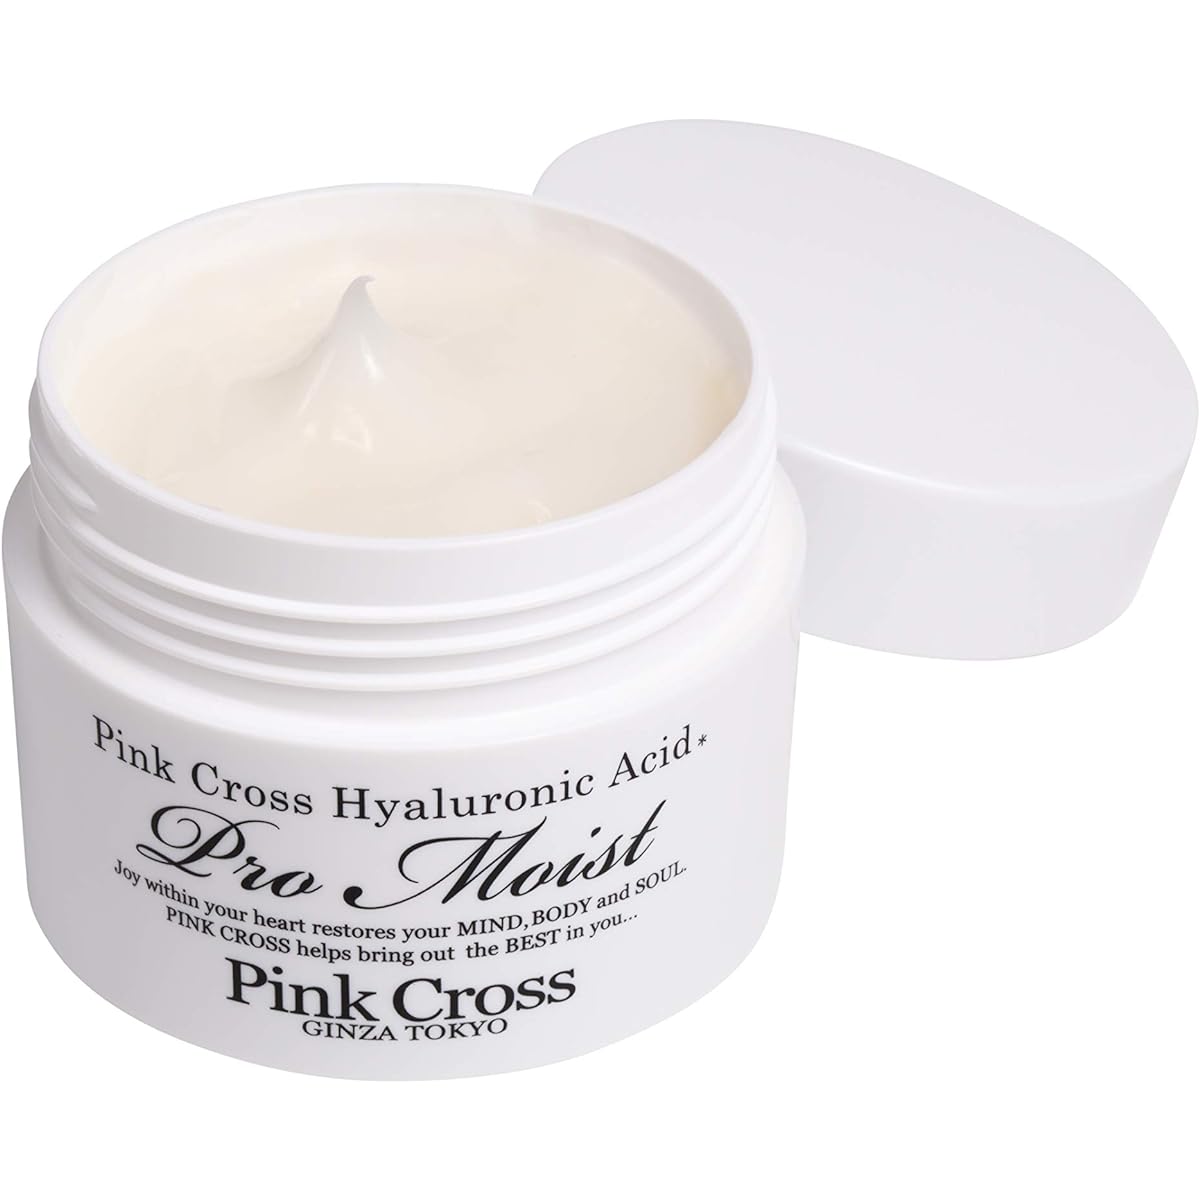 Pink Cross Gel Promoist All-in-one Gel Contains High Purity Hyaluronic Acid Highly Moisturizing Dry Skin Lotion Emulsion Moisturizing Serum Cream